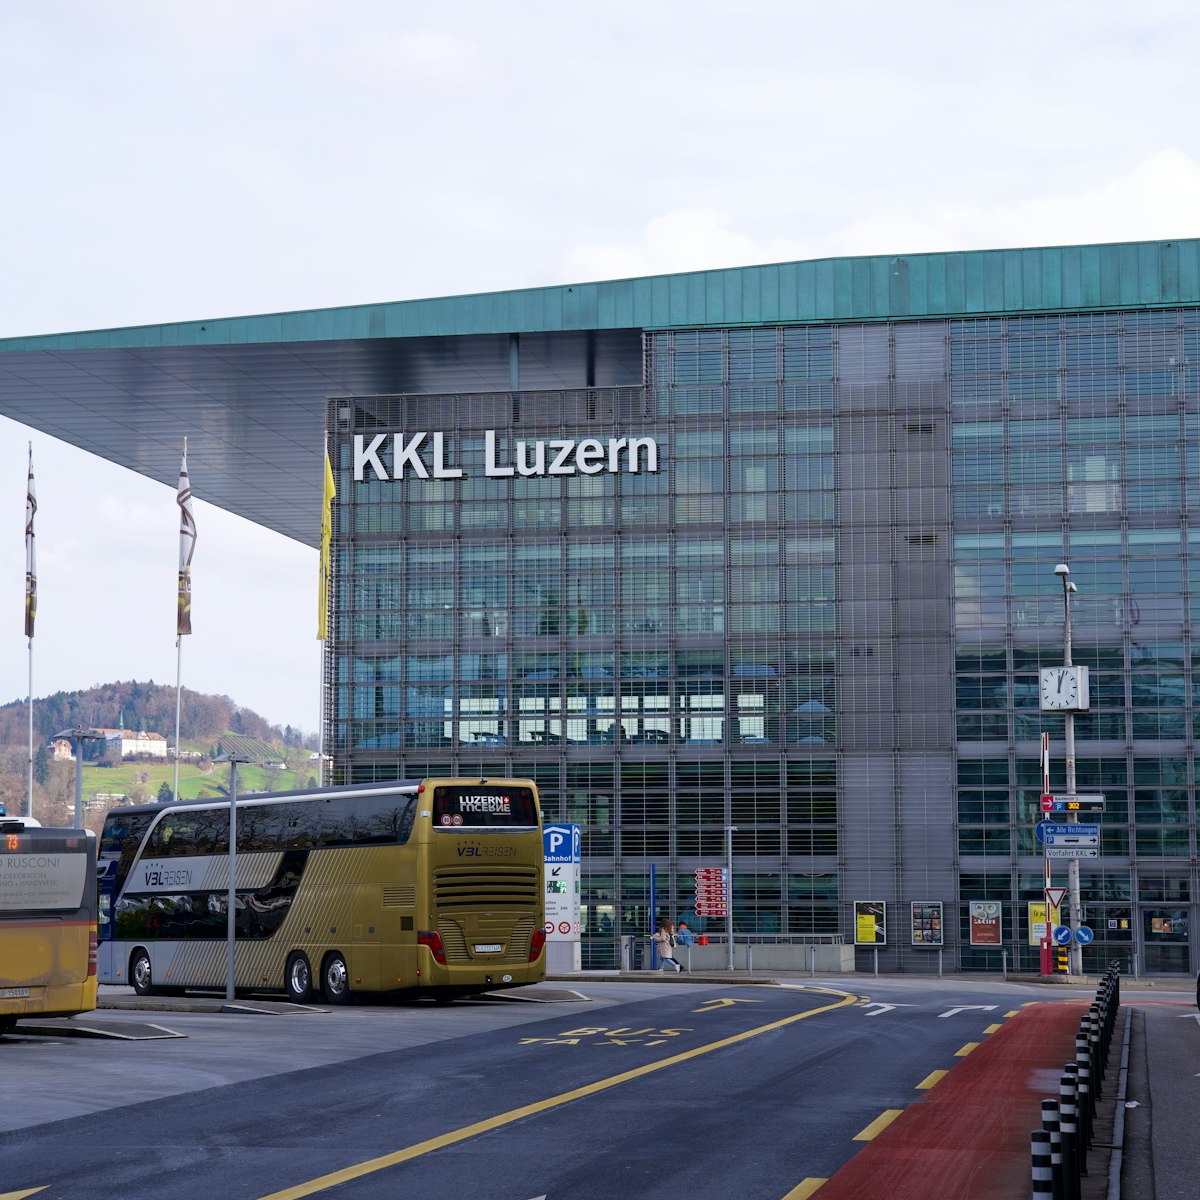 KKL culture and convention centre and Museum of Art in Luzern.